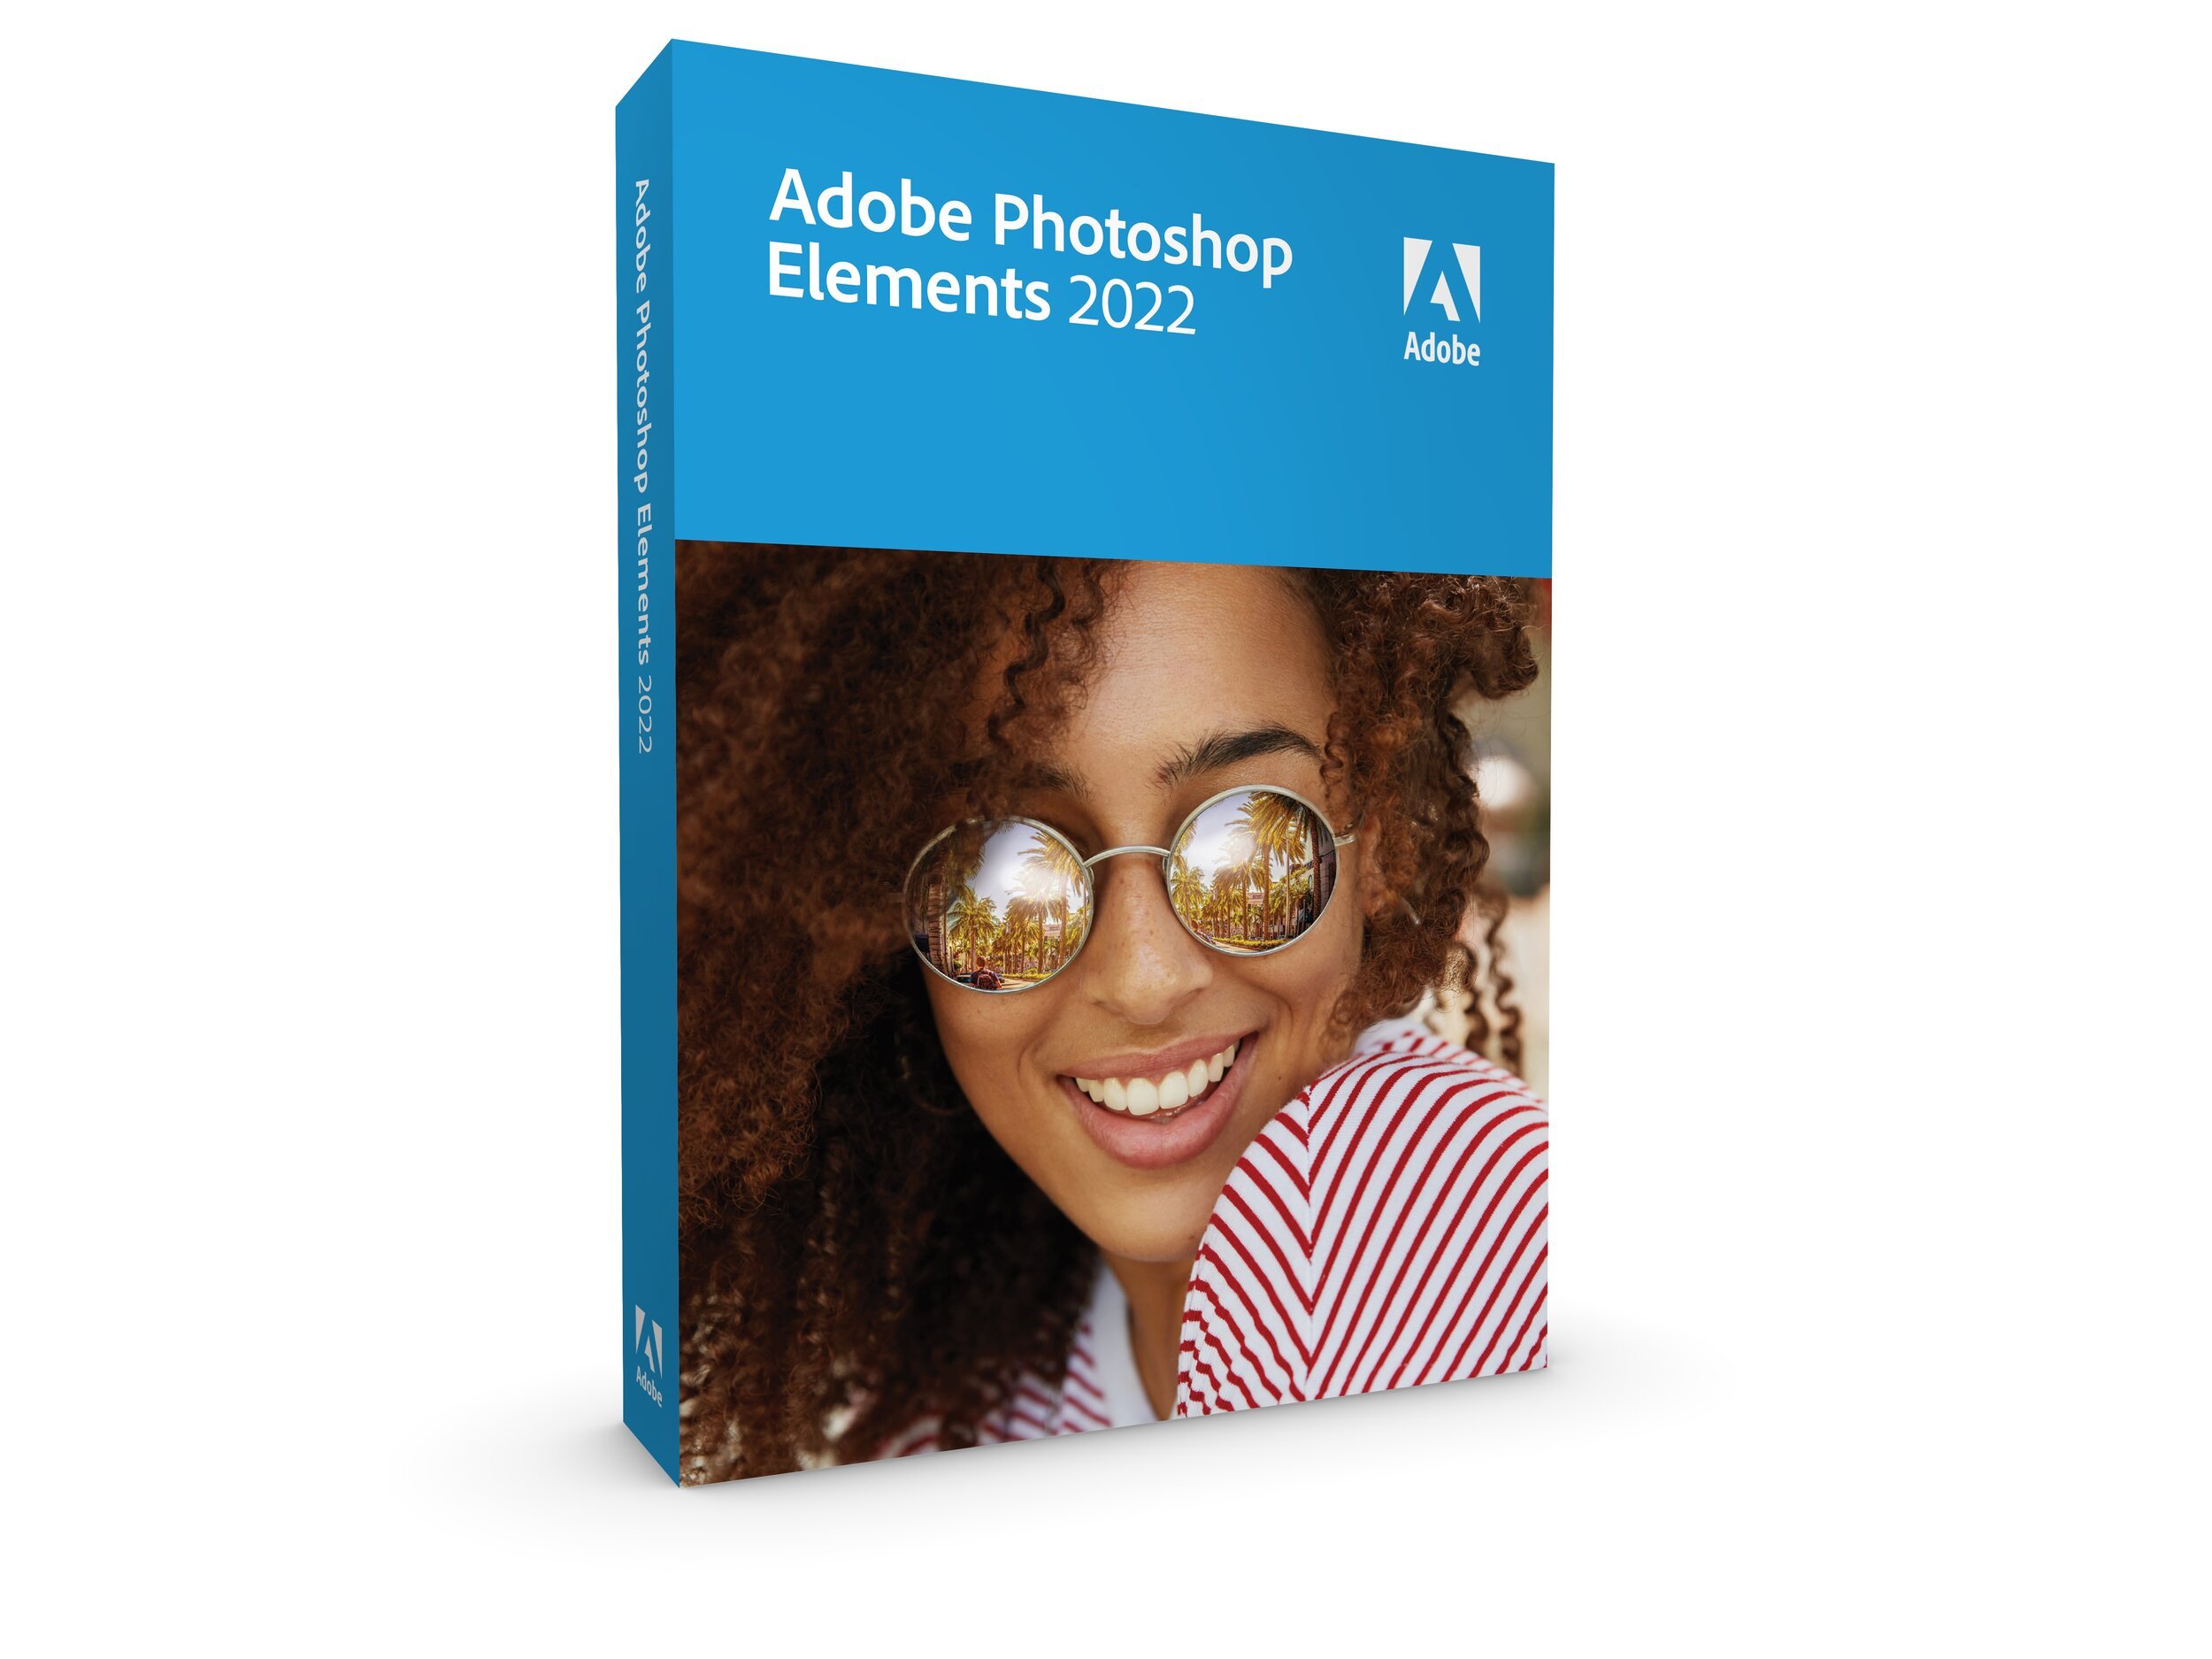 What's new in the latest version of Adobe Photoshop Elements